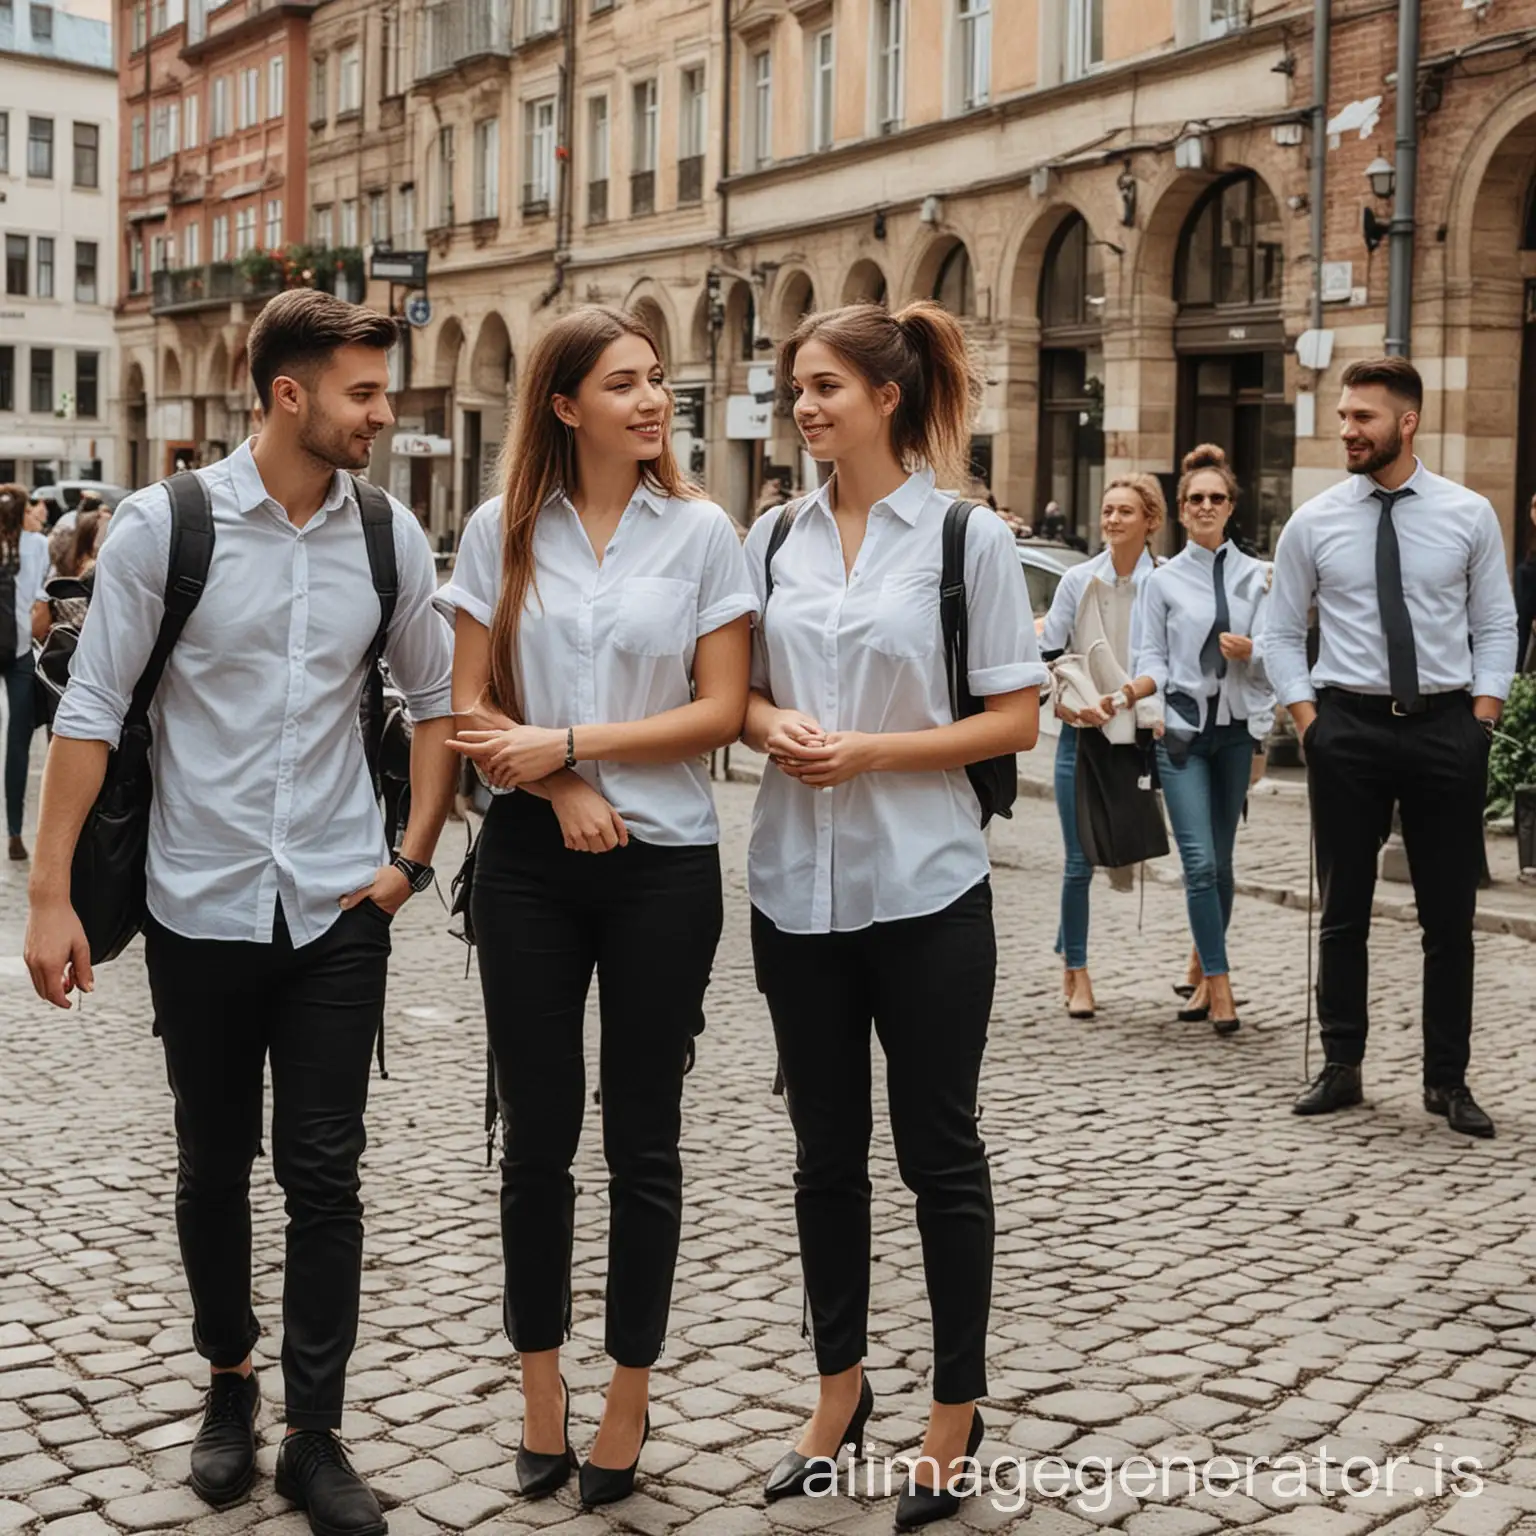 🔥Planning to move to Poland and looking for a reliable agency for job placement? We, agency TASSO, are ready to help you every step of the way! Here are several reasons why cooperation with us is your best choice:1️⃣ Time savings. We have access to a wide range of vacancies and will quickly select suitable options for you ✨2️⃣ Professional consultations. Our specialists will help you determine the position and provide a full job description ✨3️⃣ Document legalization. We will ensure the correct processing of all necessary documents for legal work and residence in Poland, saving you from bureaucratic complexities ✨4️⃣ Support at all stages. With us, you will receive help not only with employment but also during the adaptation process in a new place, which is especially important for those who are moving to another country for the first time ✨5️⃣ Reliability guarantee. We cooperate only with verified employers, which reduces the risk of encountering unfair companies ✨😎 Trust professionals with experience and good reputation - agency TASSO!Don't miss the opportunity to make the job search process easy and safe with us! 🏆